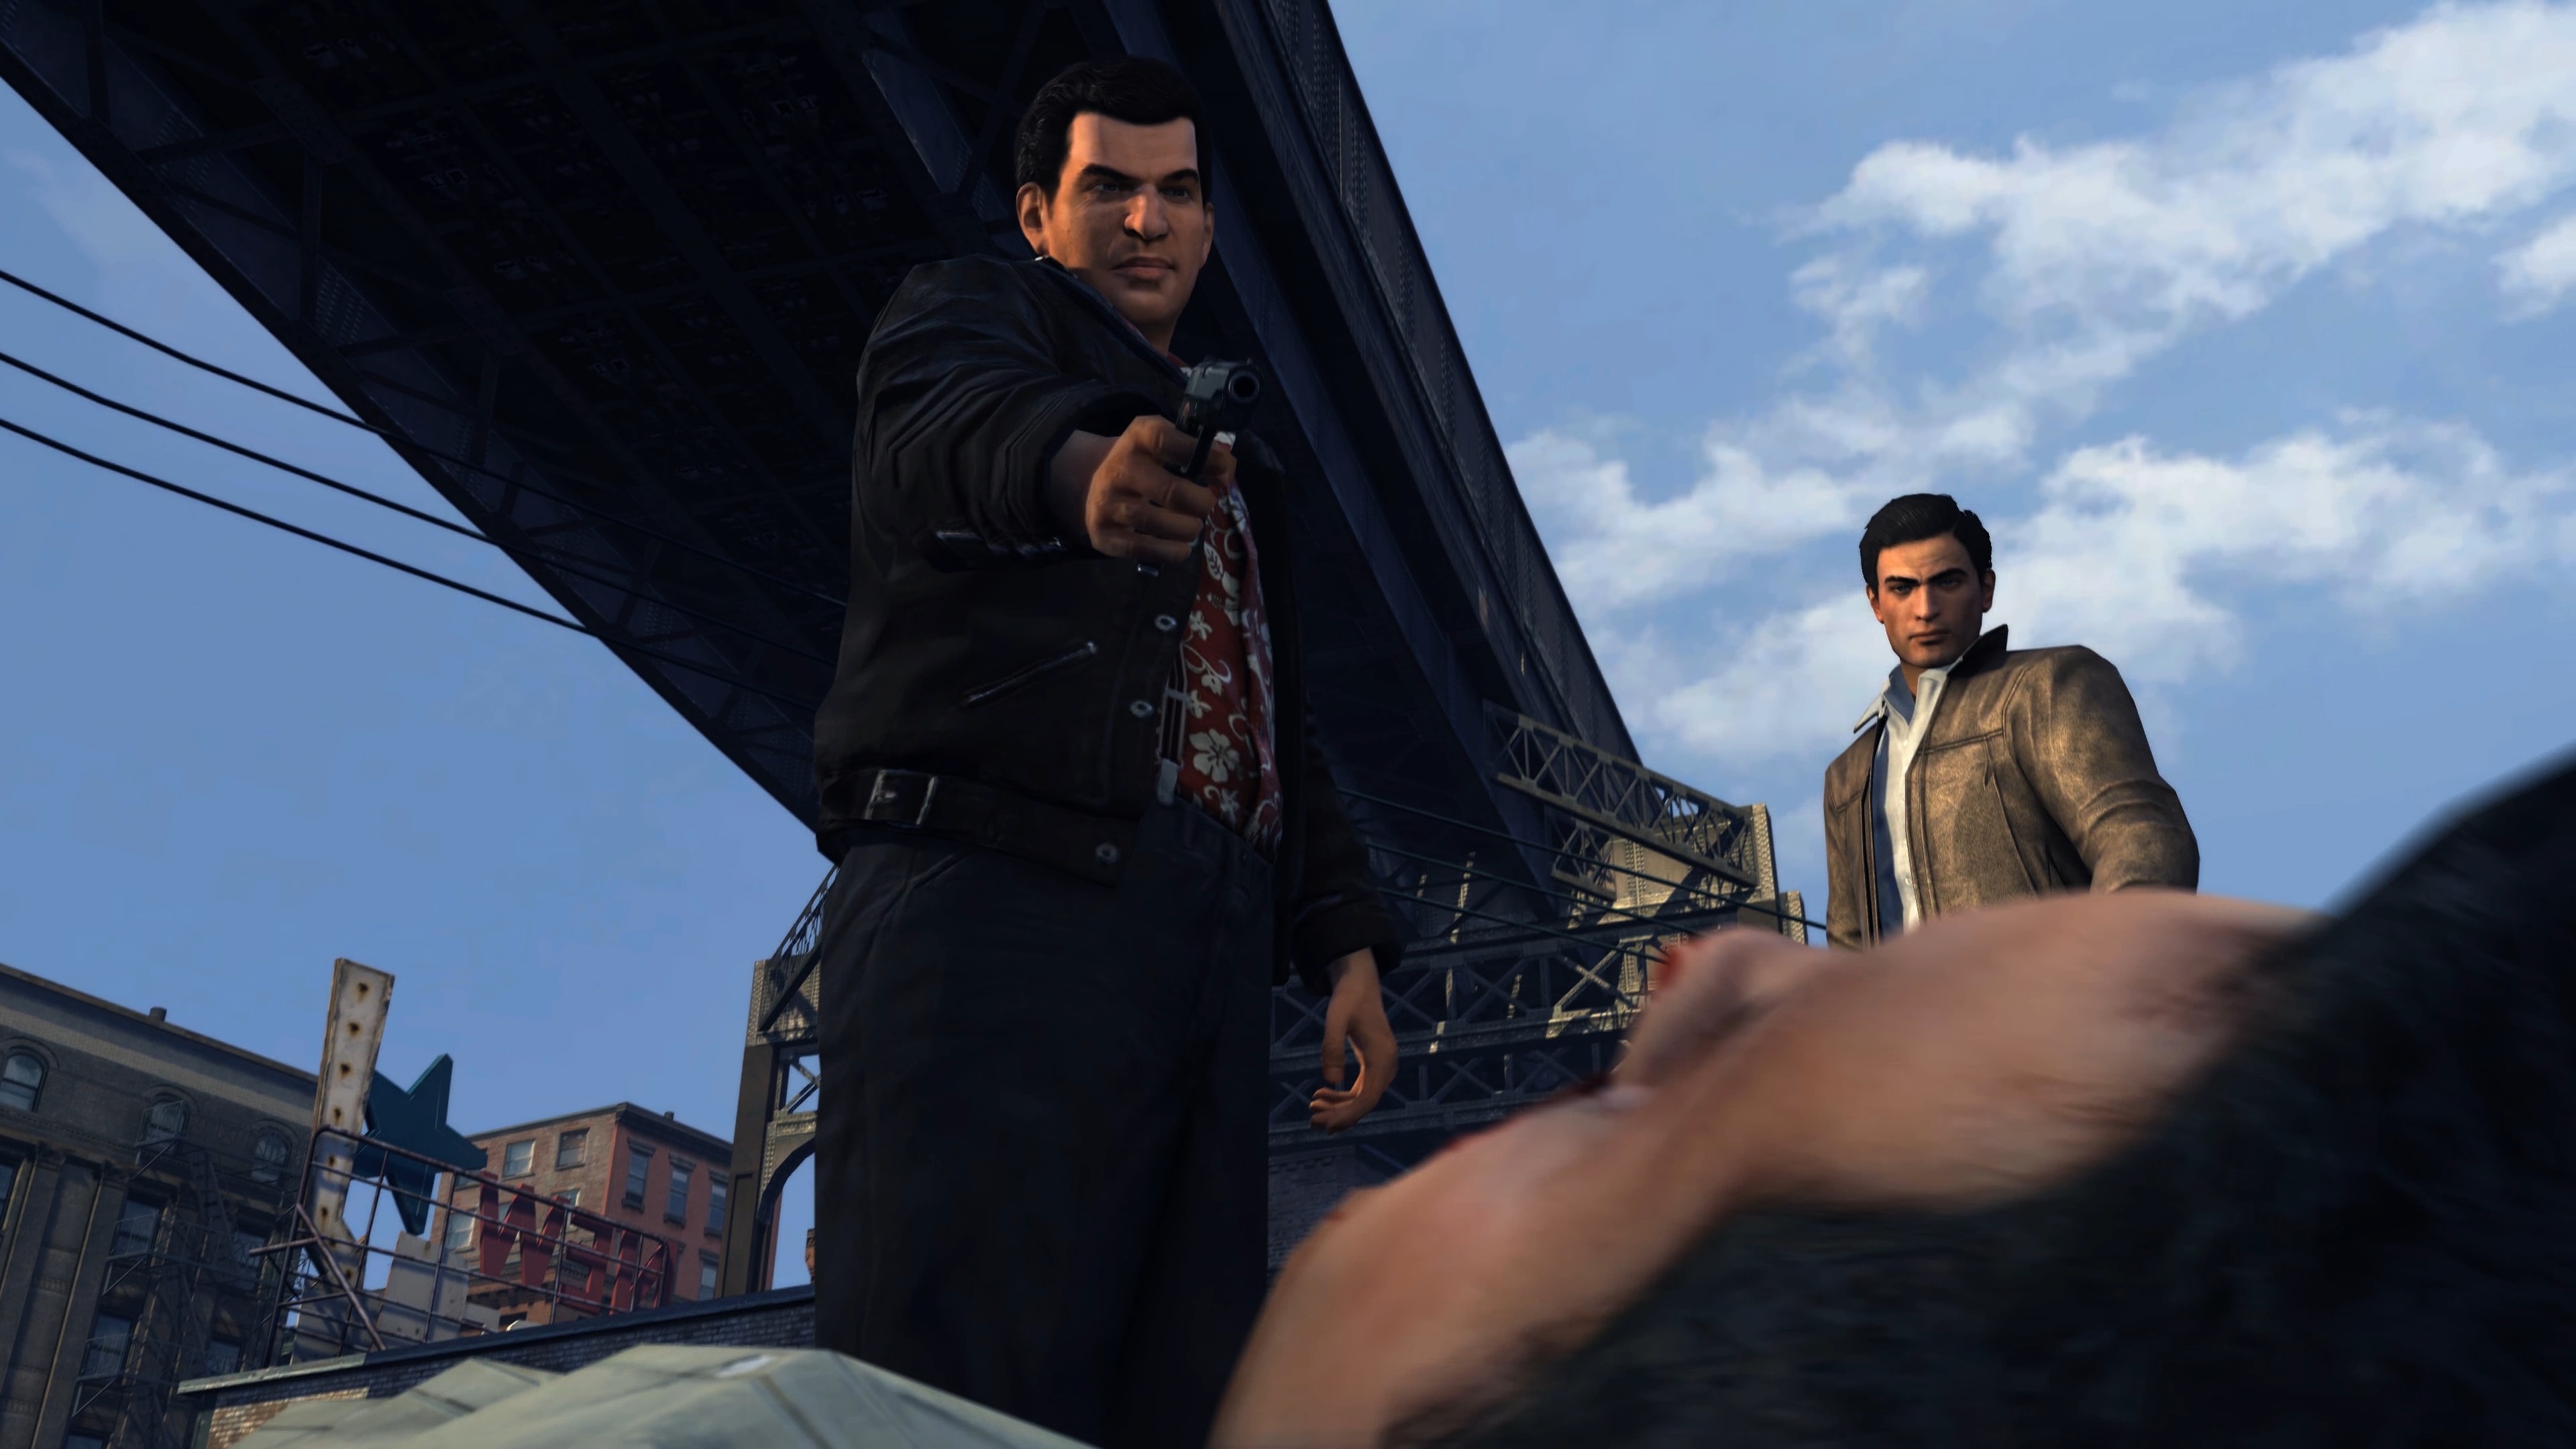 How To Get Mafia 2 And Mafia 3 Definitive Editions For Free If You Own The  Originals - GameSpot